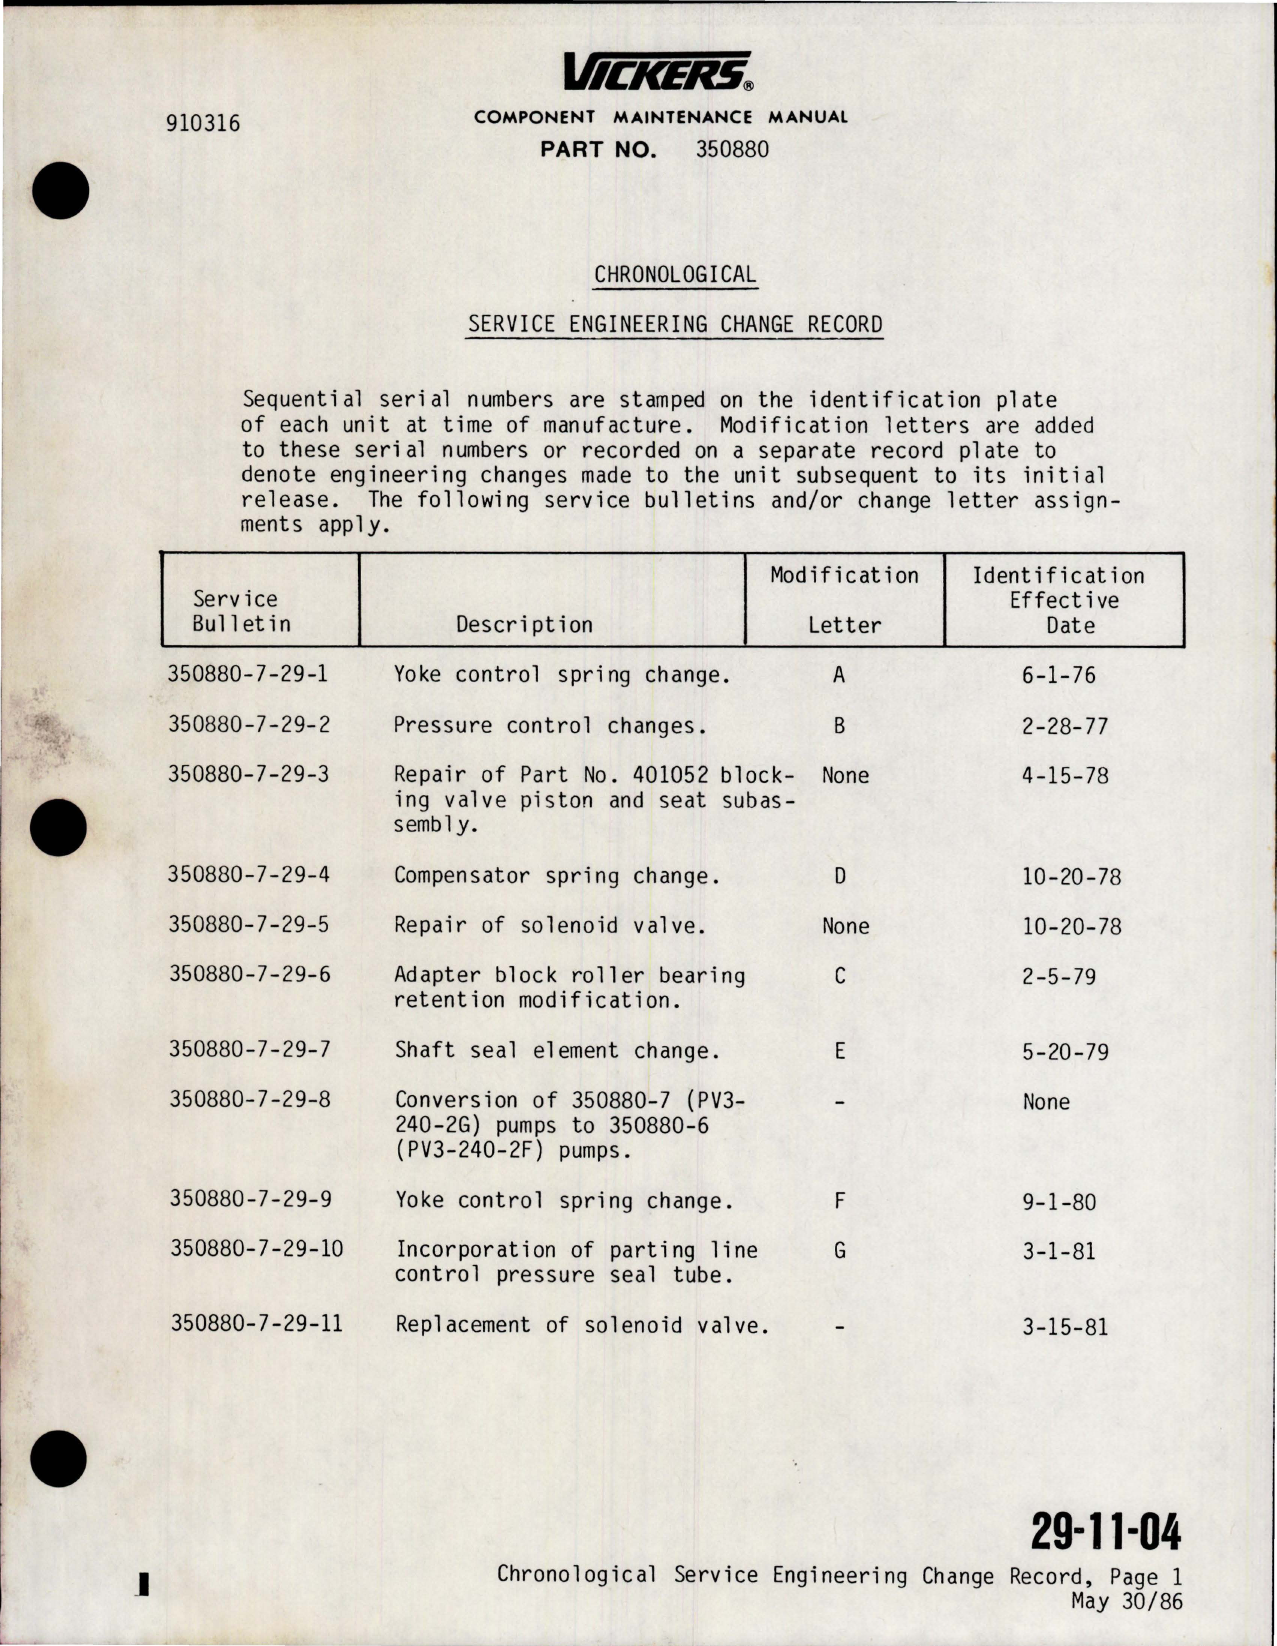 Sample page 9 from AirCorps Library document: Maintenance Manual with Illustrated Parts List for Variable Displacement Hydraulic Pump - Model PV3-240-2G - Part 350880-7